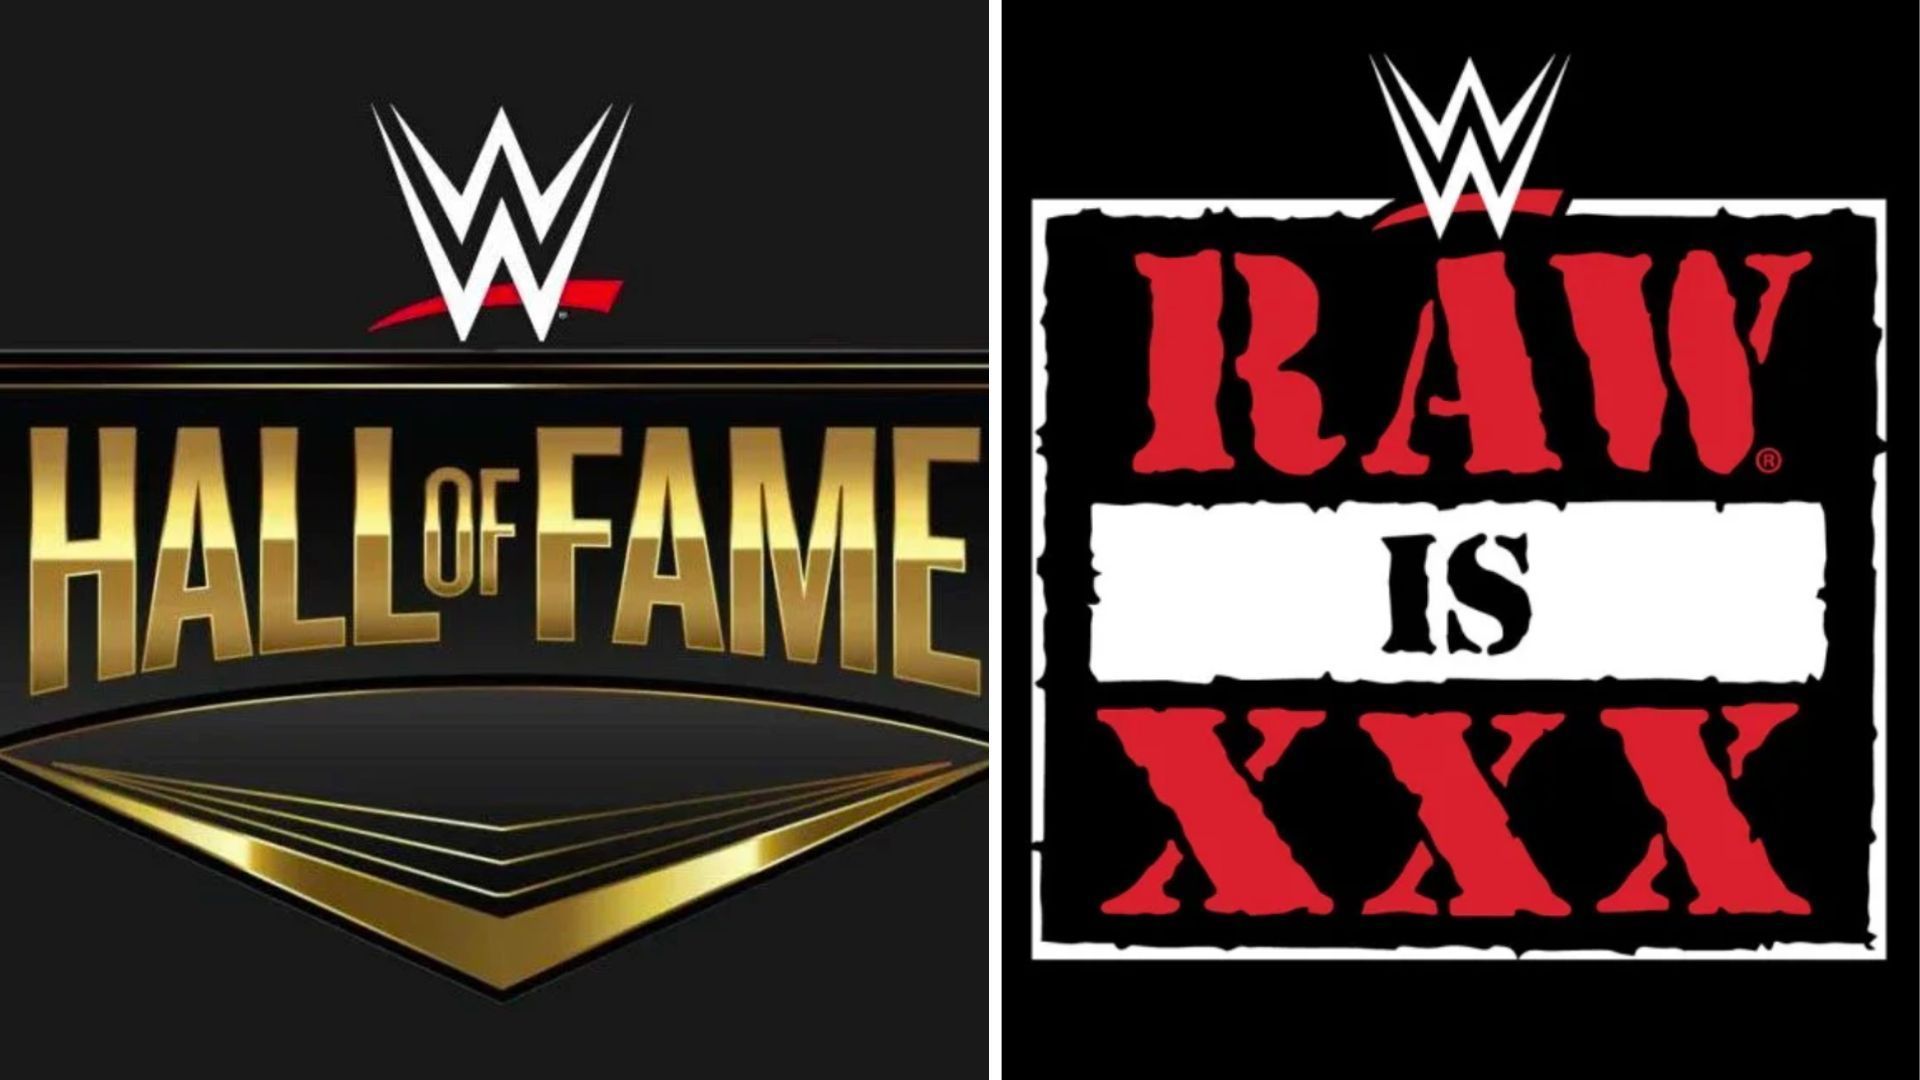 Two Hall of Famers may appear on WWE RAW